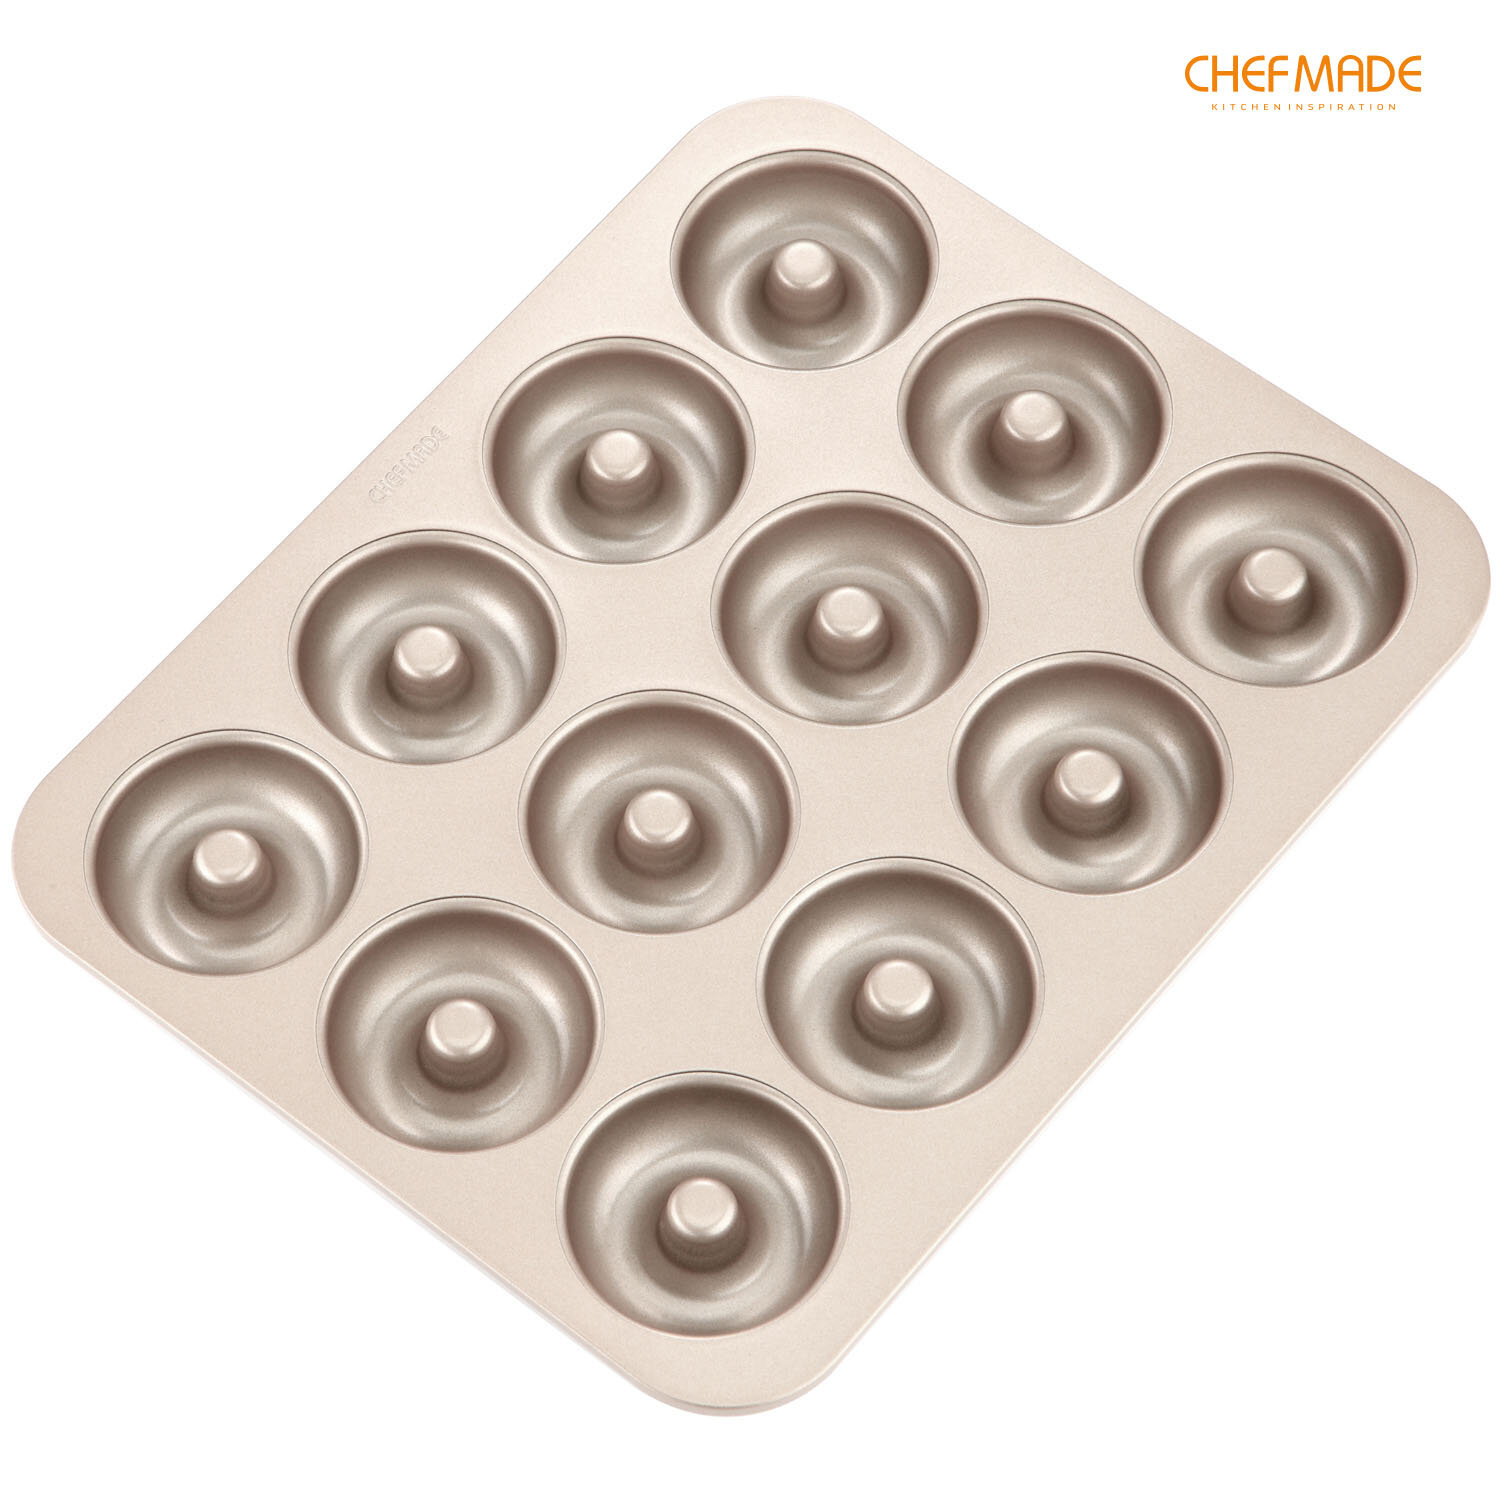 12-Cavity Non-Stick Ring Doughnut Bakeware for Oven Baking Champagne Gold CHEFMADE Donut Mold Cake Pan 